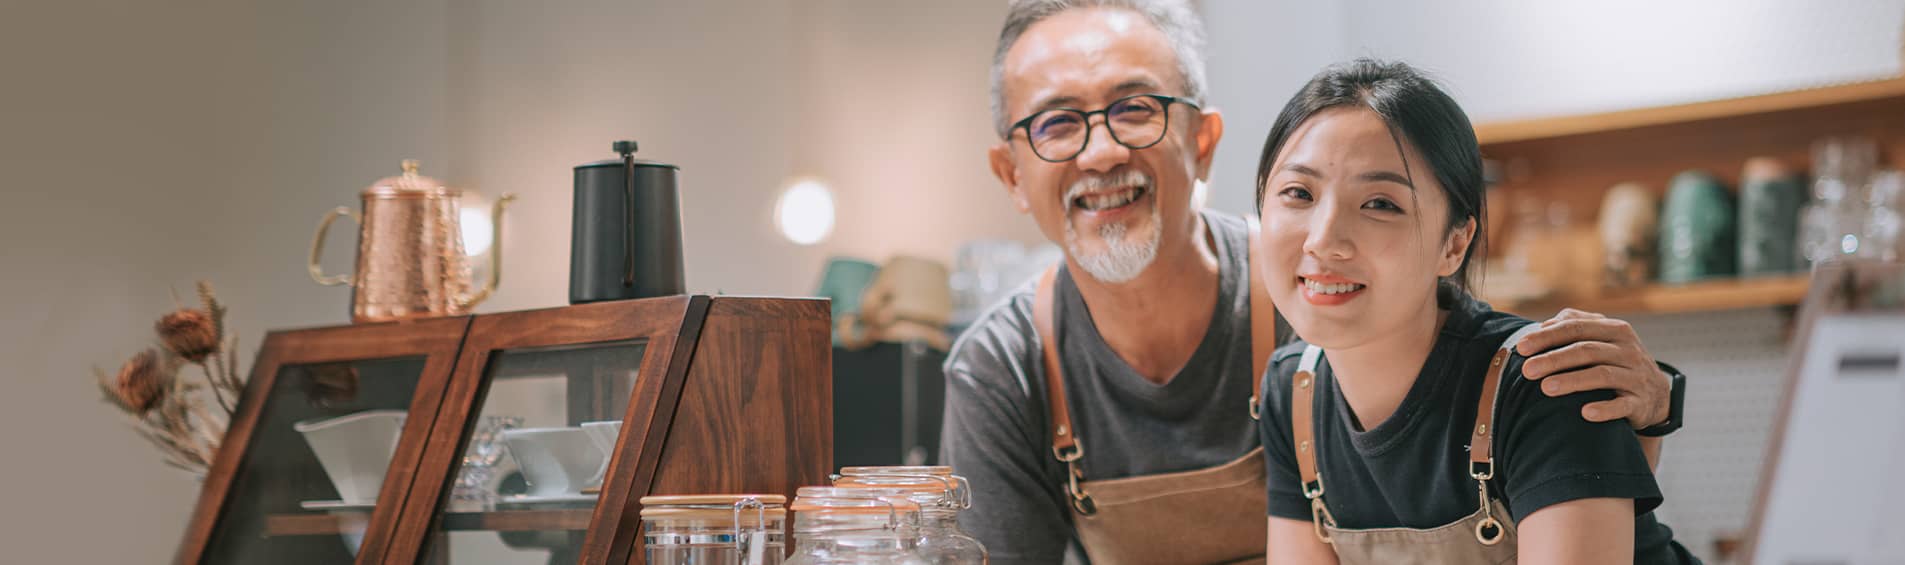 A young woman and an older man, both of Asian descent, smile from behind the counter of a cafe. The shop looks modern, and the counter is decorated with goose neck kettles and pourover coffee drippers.